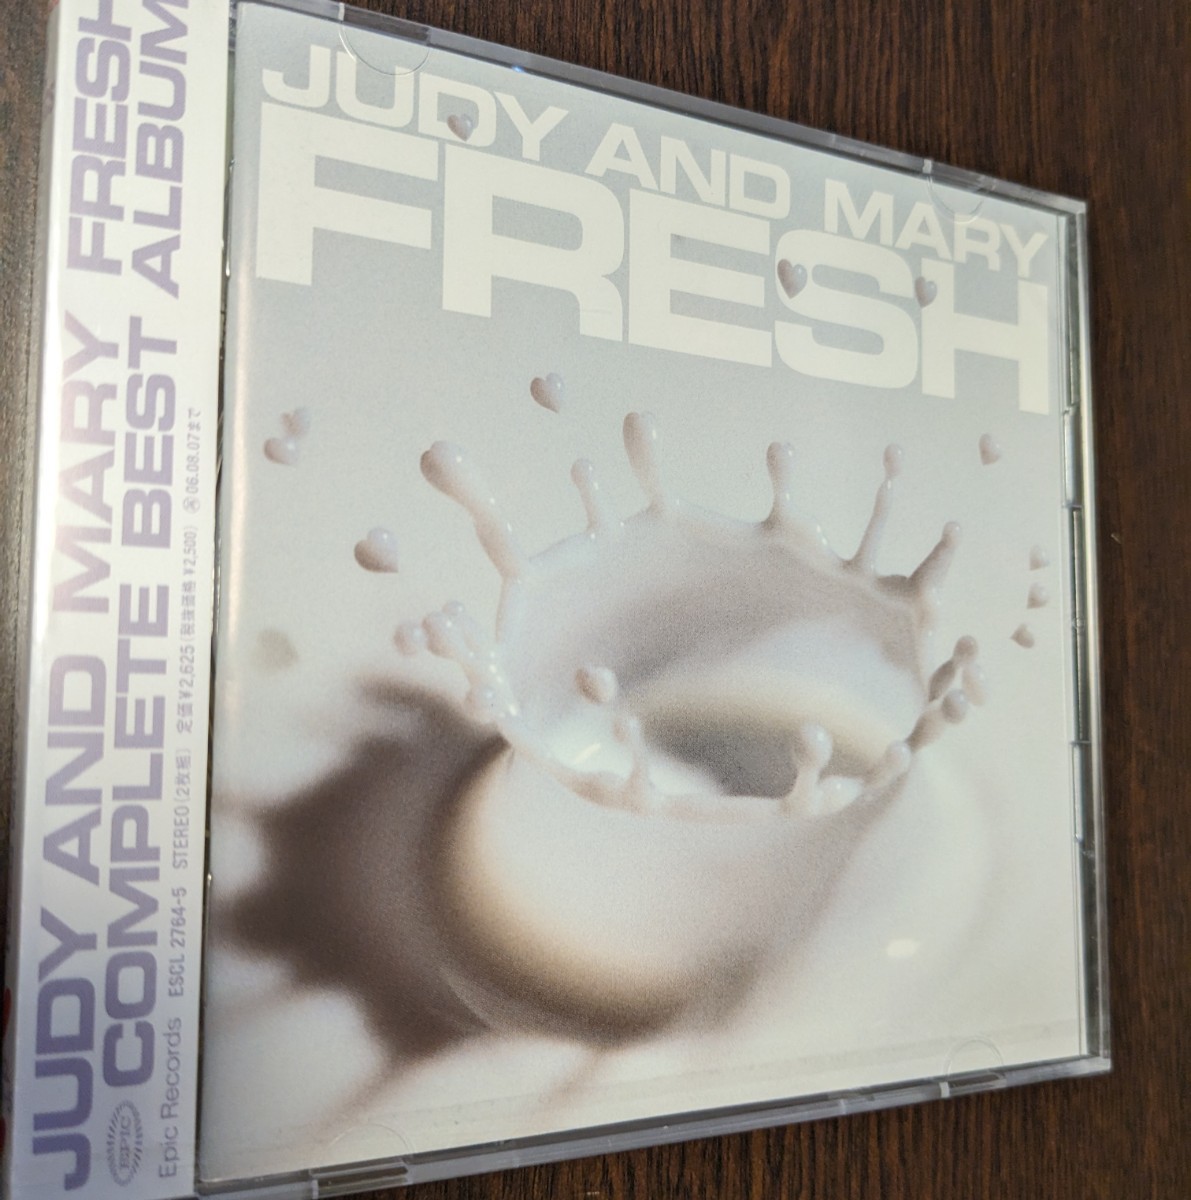 M анонимность рассылка JUDY AND MARY COMPLETE BEST ALBUM FRESH Best of 2CD Judy and Marie Judy Мали YUKI 4988010016388